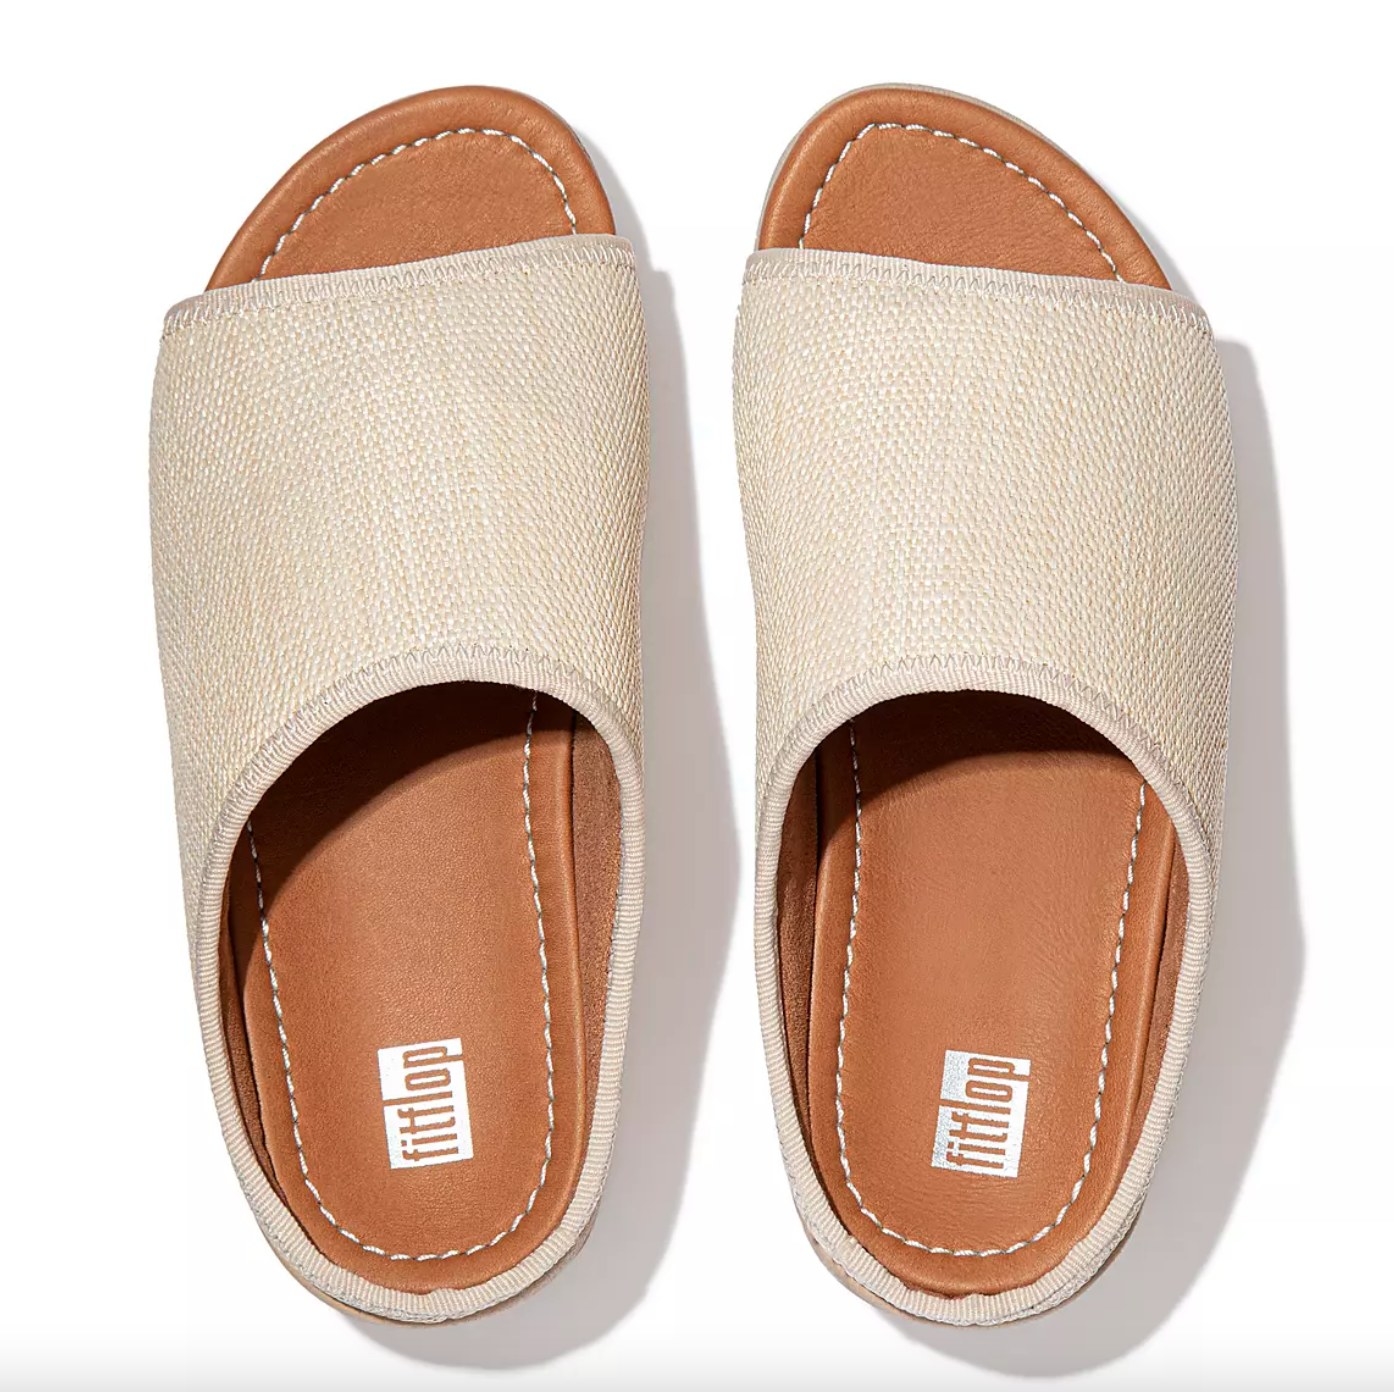 The pair of straw slides 